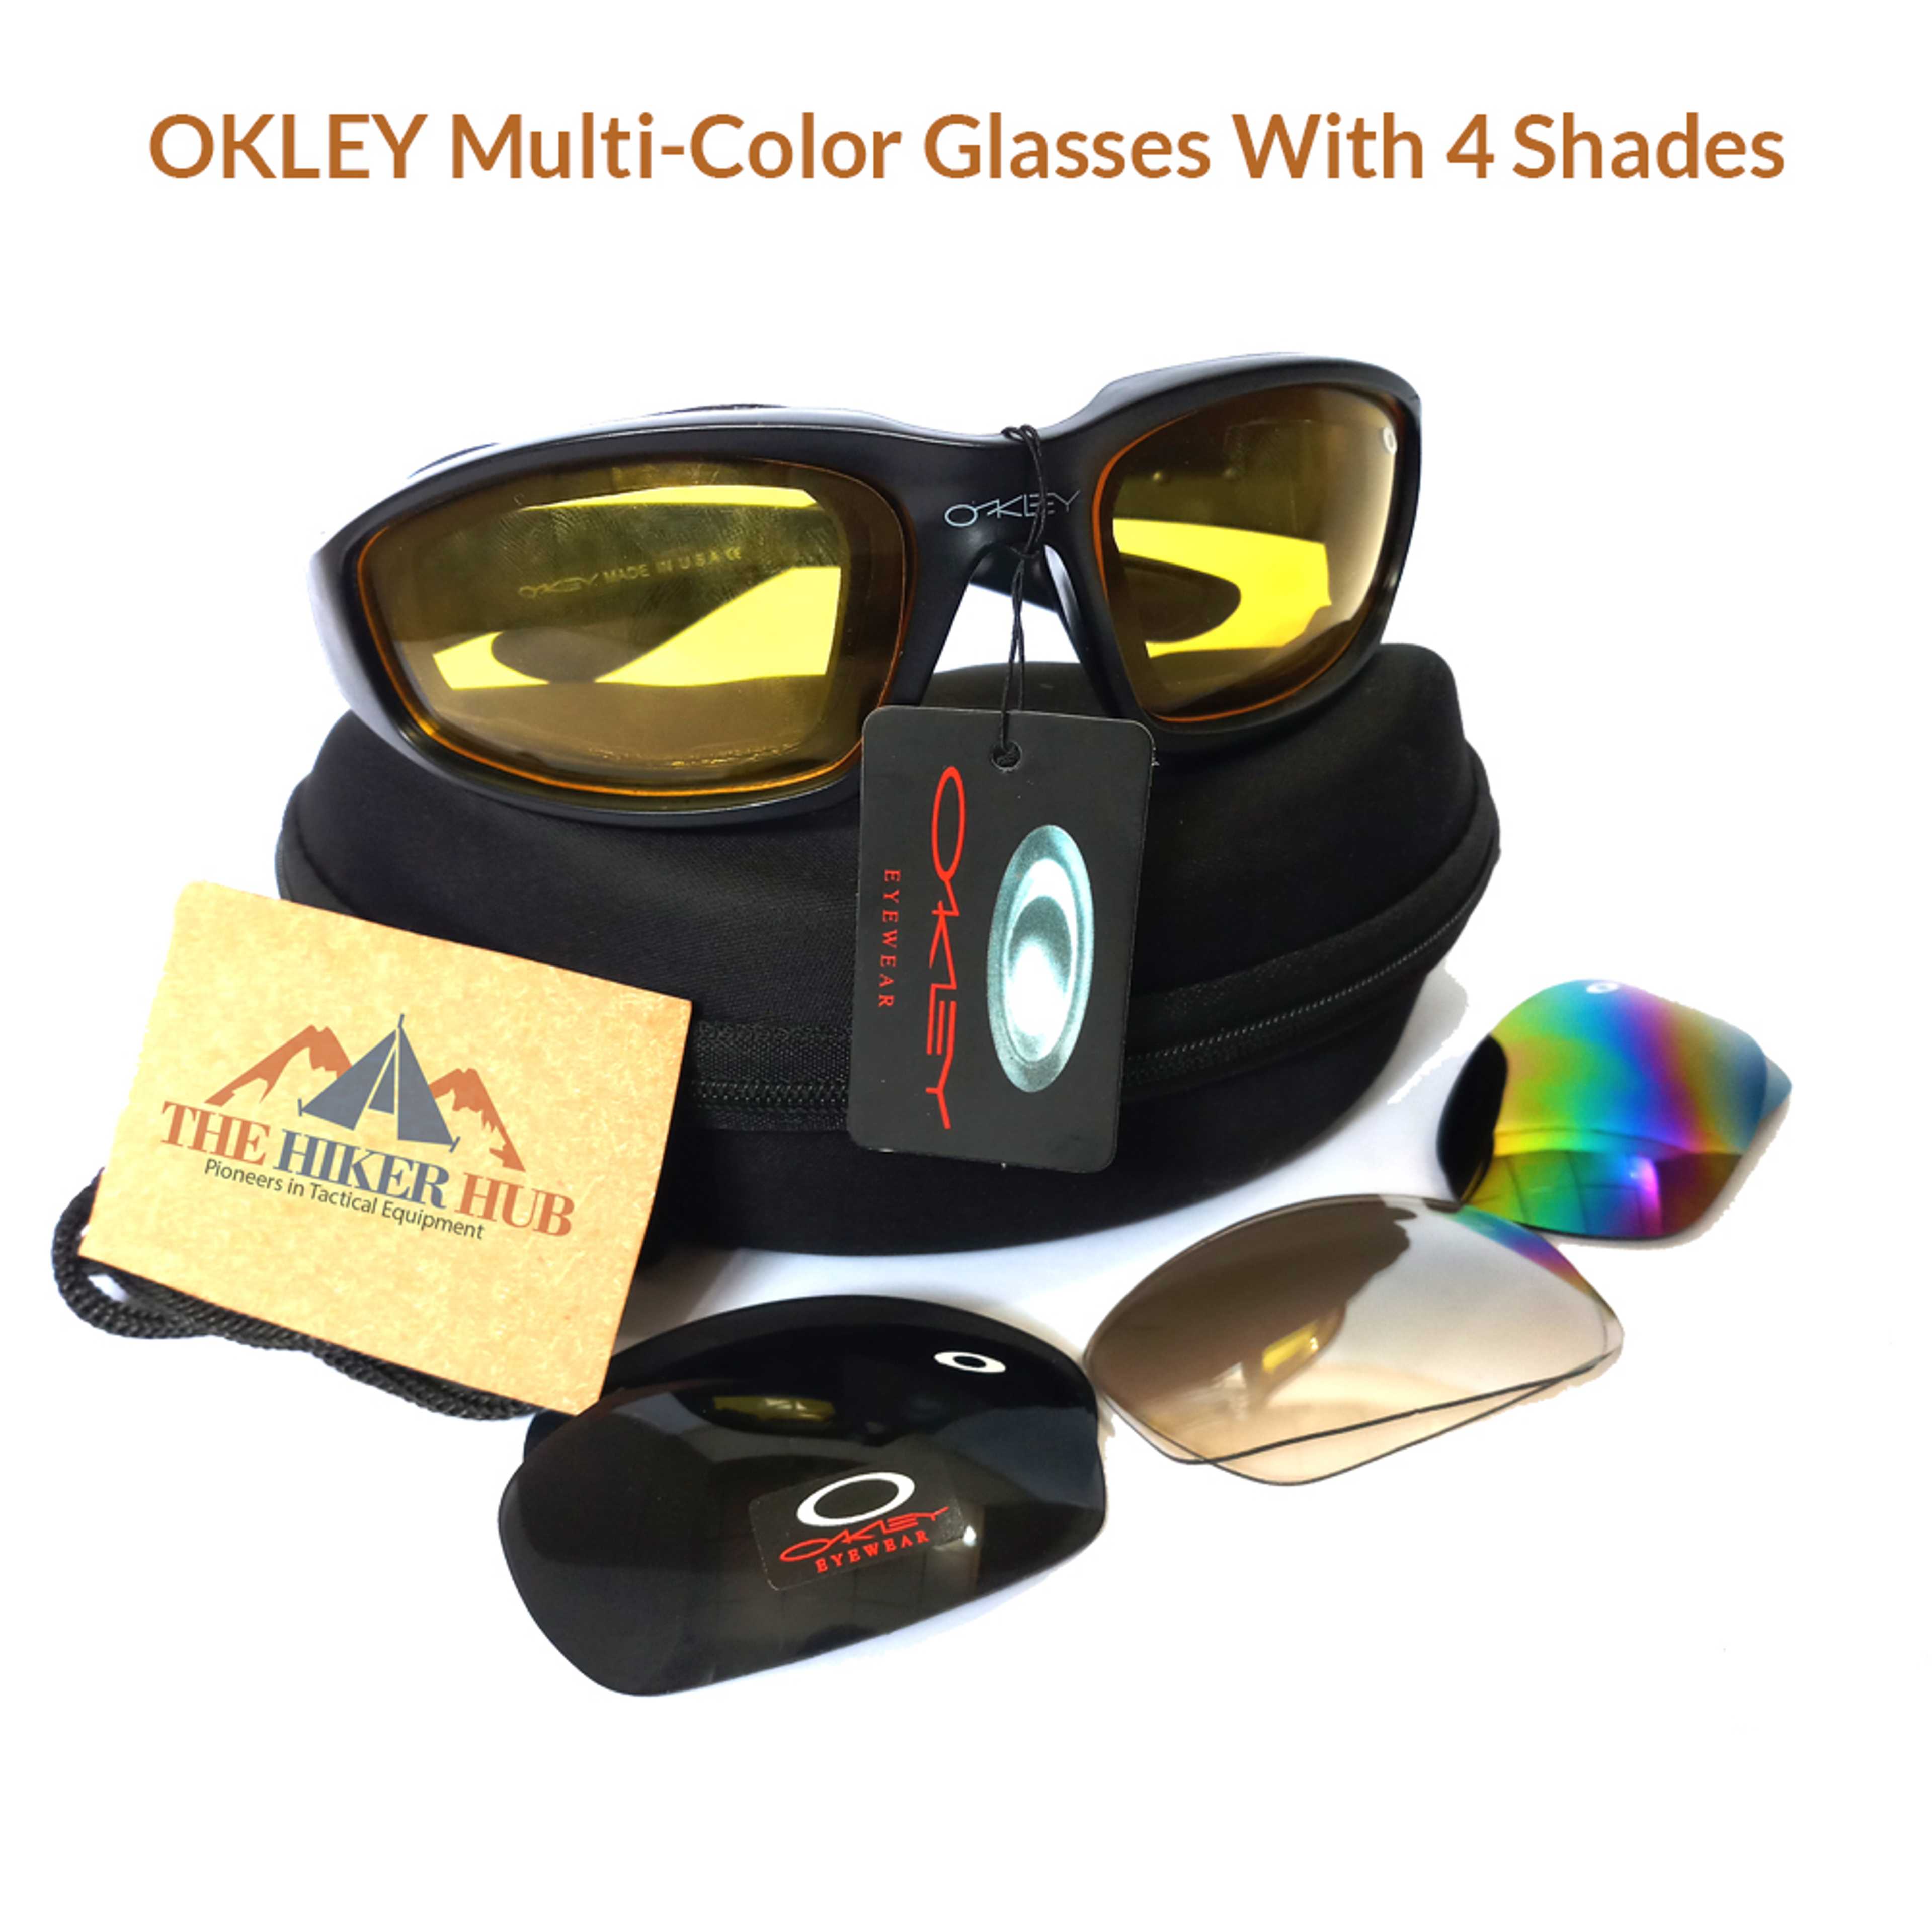 Oakley Multi-Color Glasses With 4 Shades And Free Oakley Hard Pouch